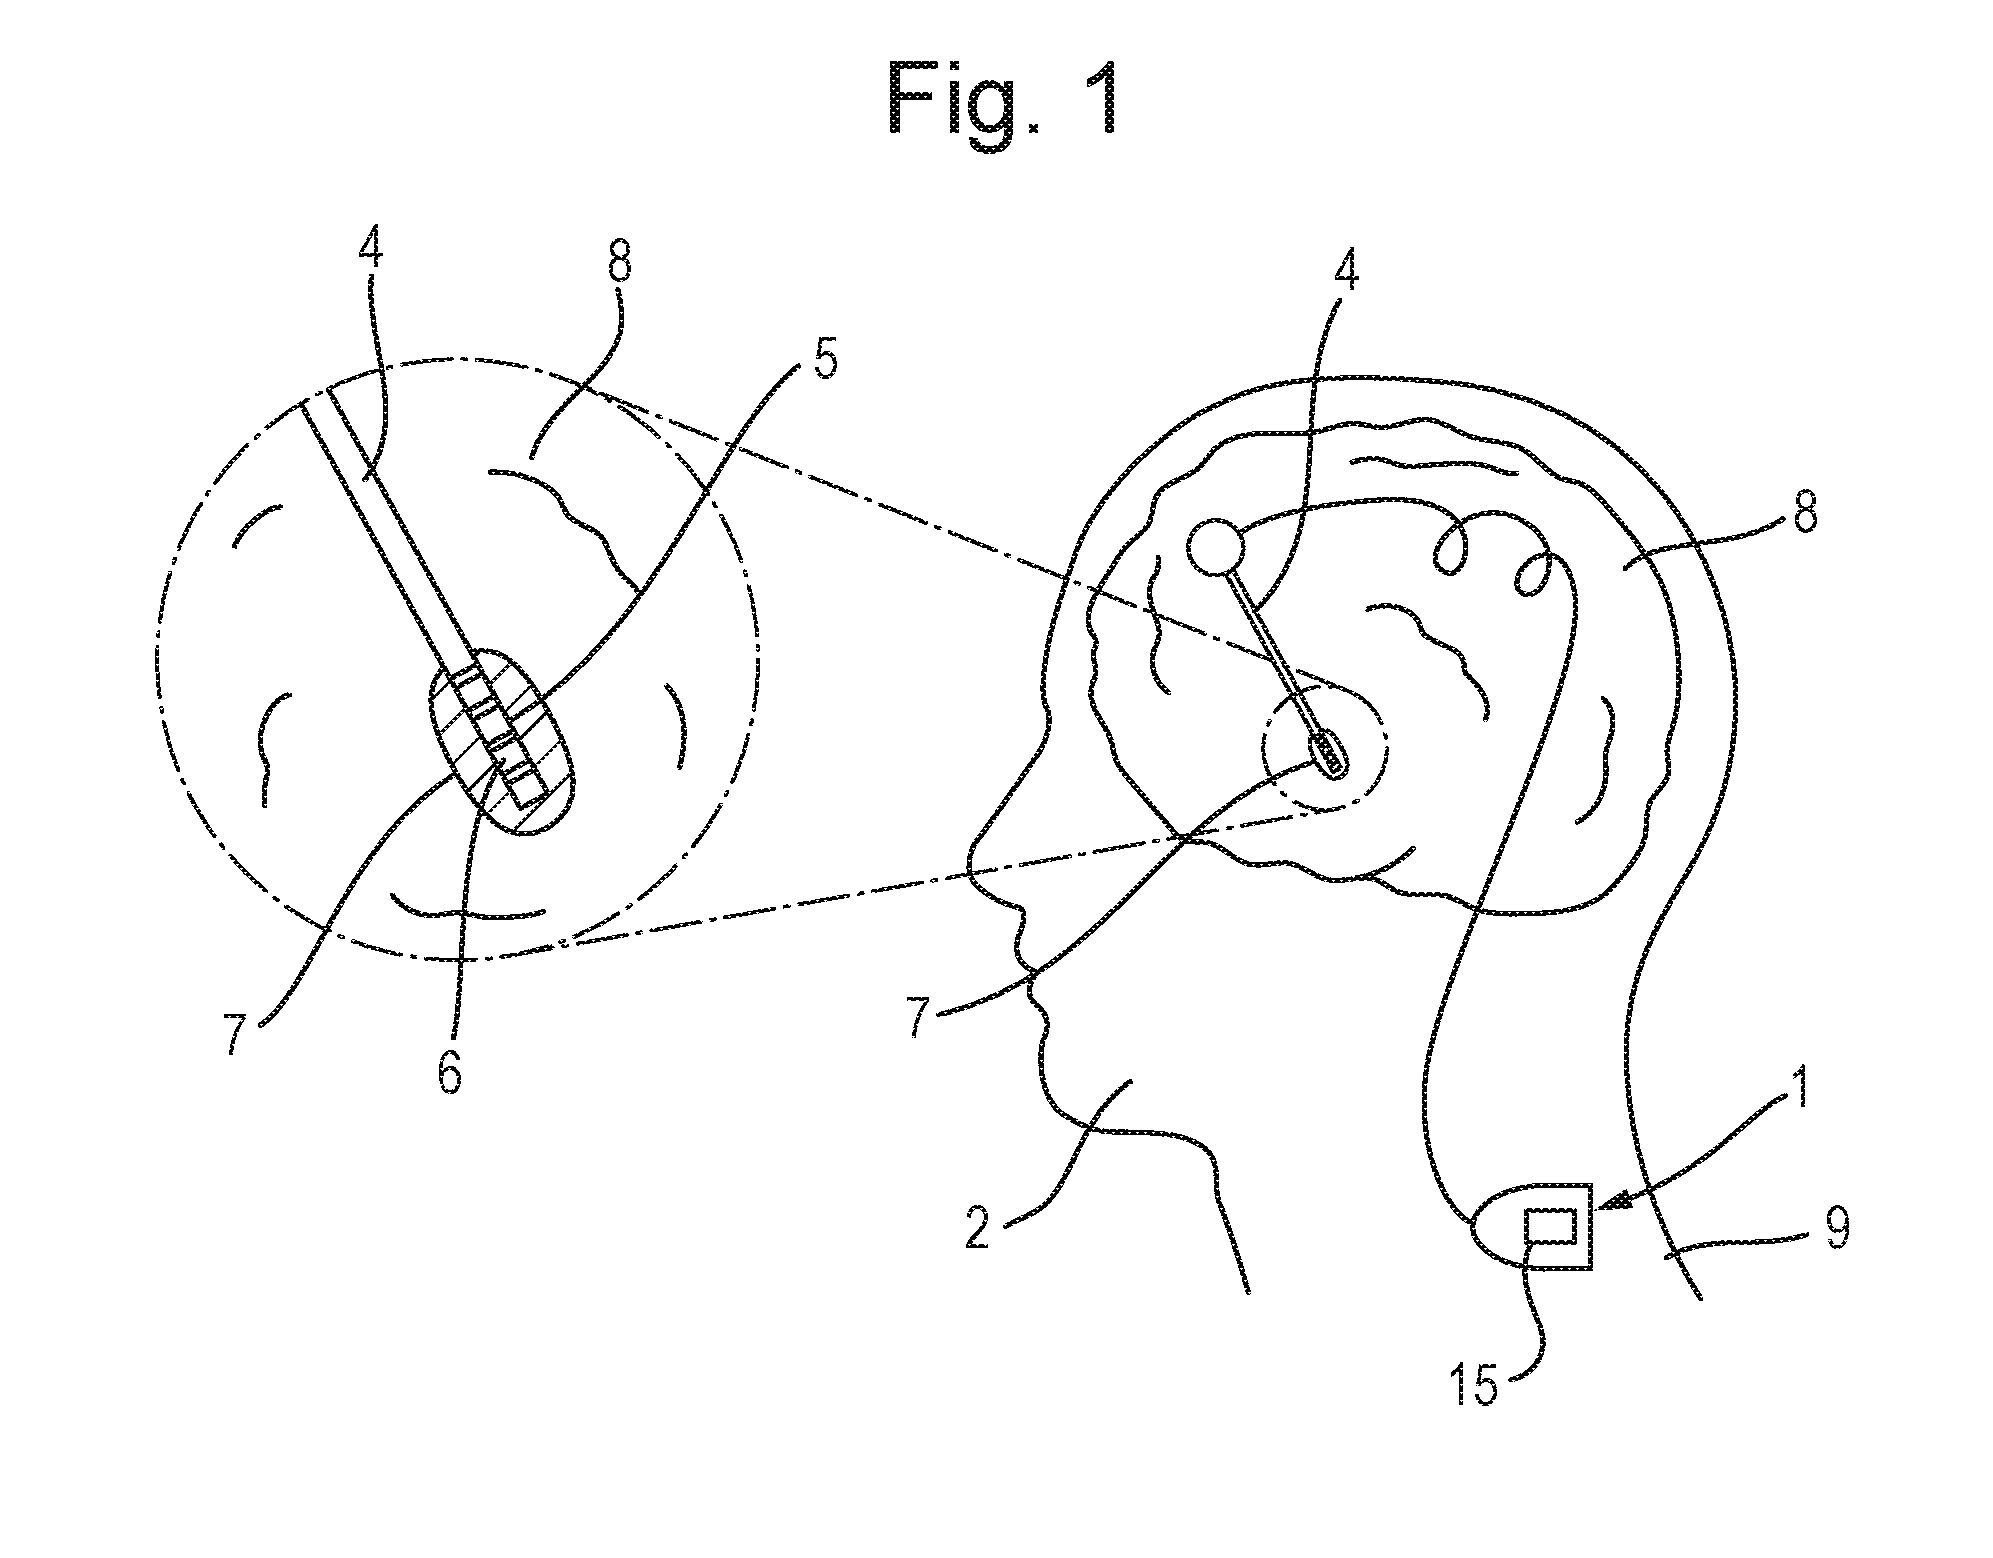 Figure 1 from the patent: a side view of a human head showing the impanted deep brain electrode and leads to an implanted device.